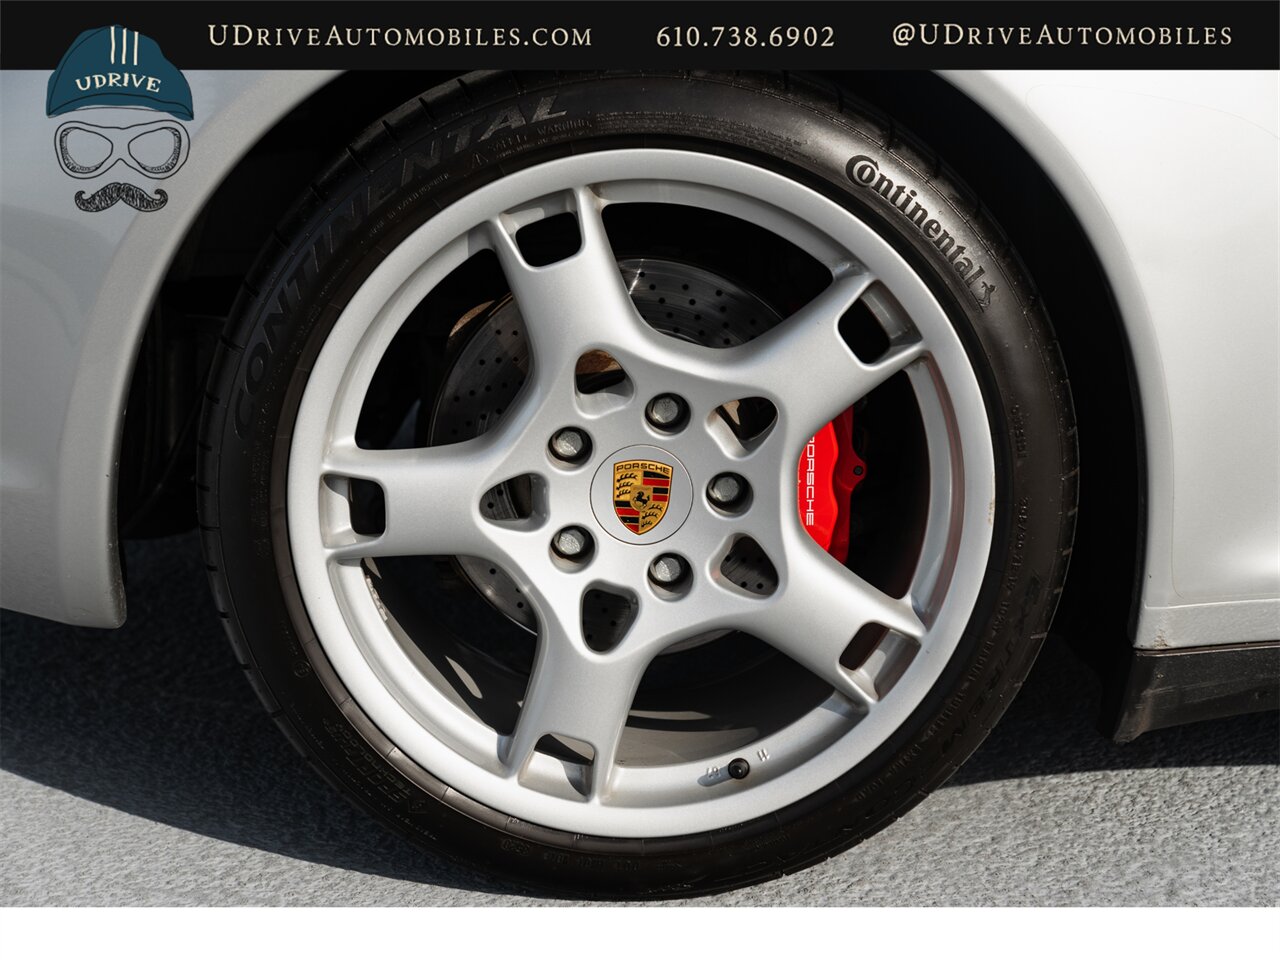 2006 Porsche 911 Carrera 4S  997 C4S 6 Speed Manual Service History - Photo 58 - West Chester, PA 19382